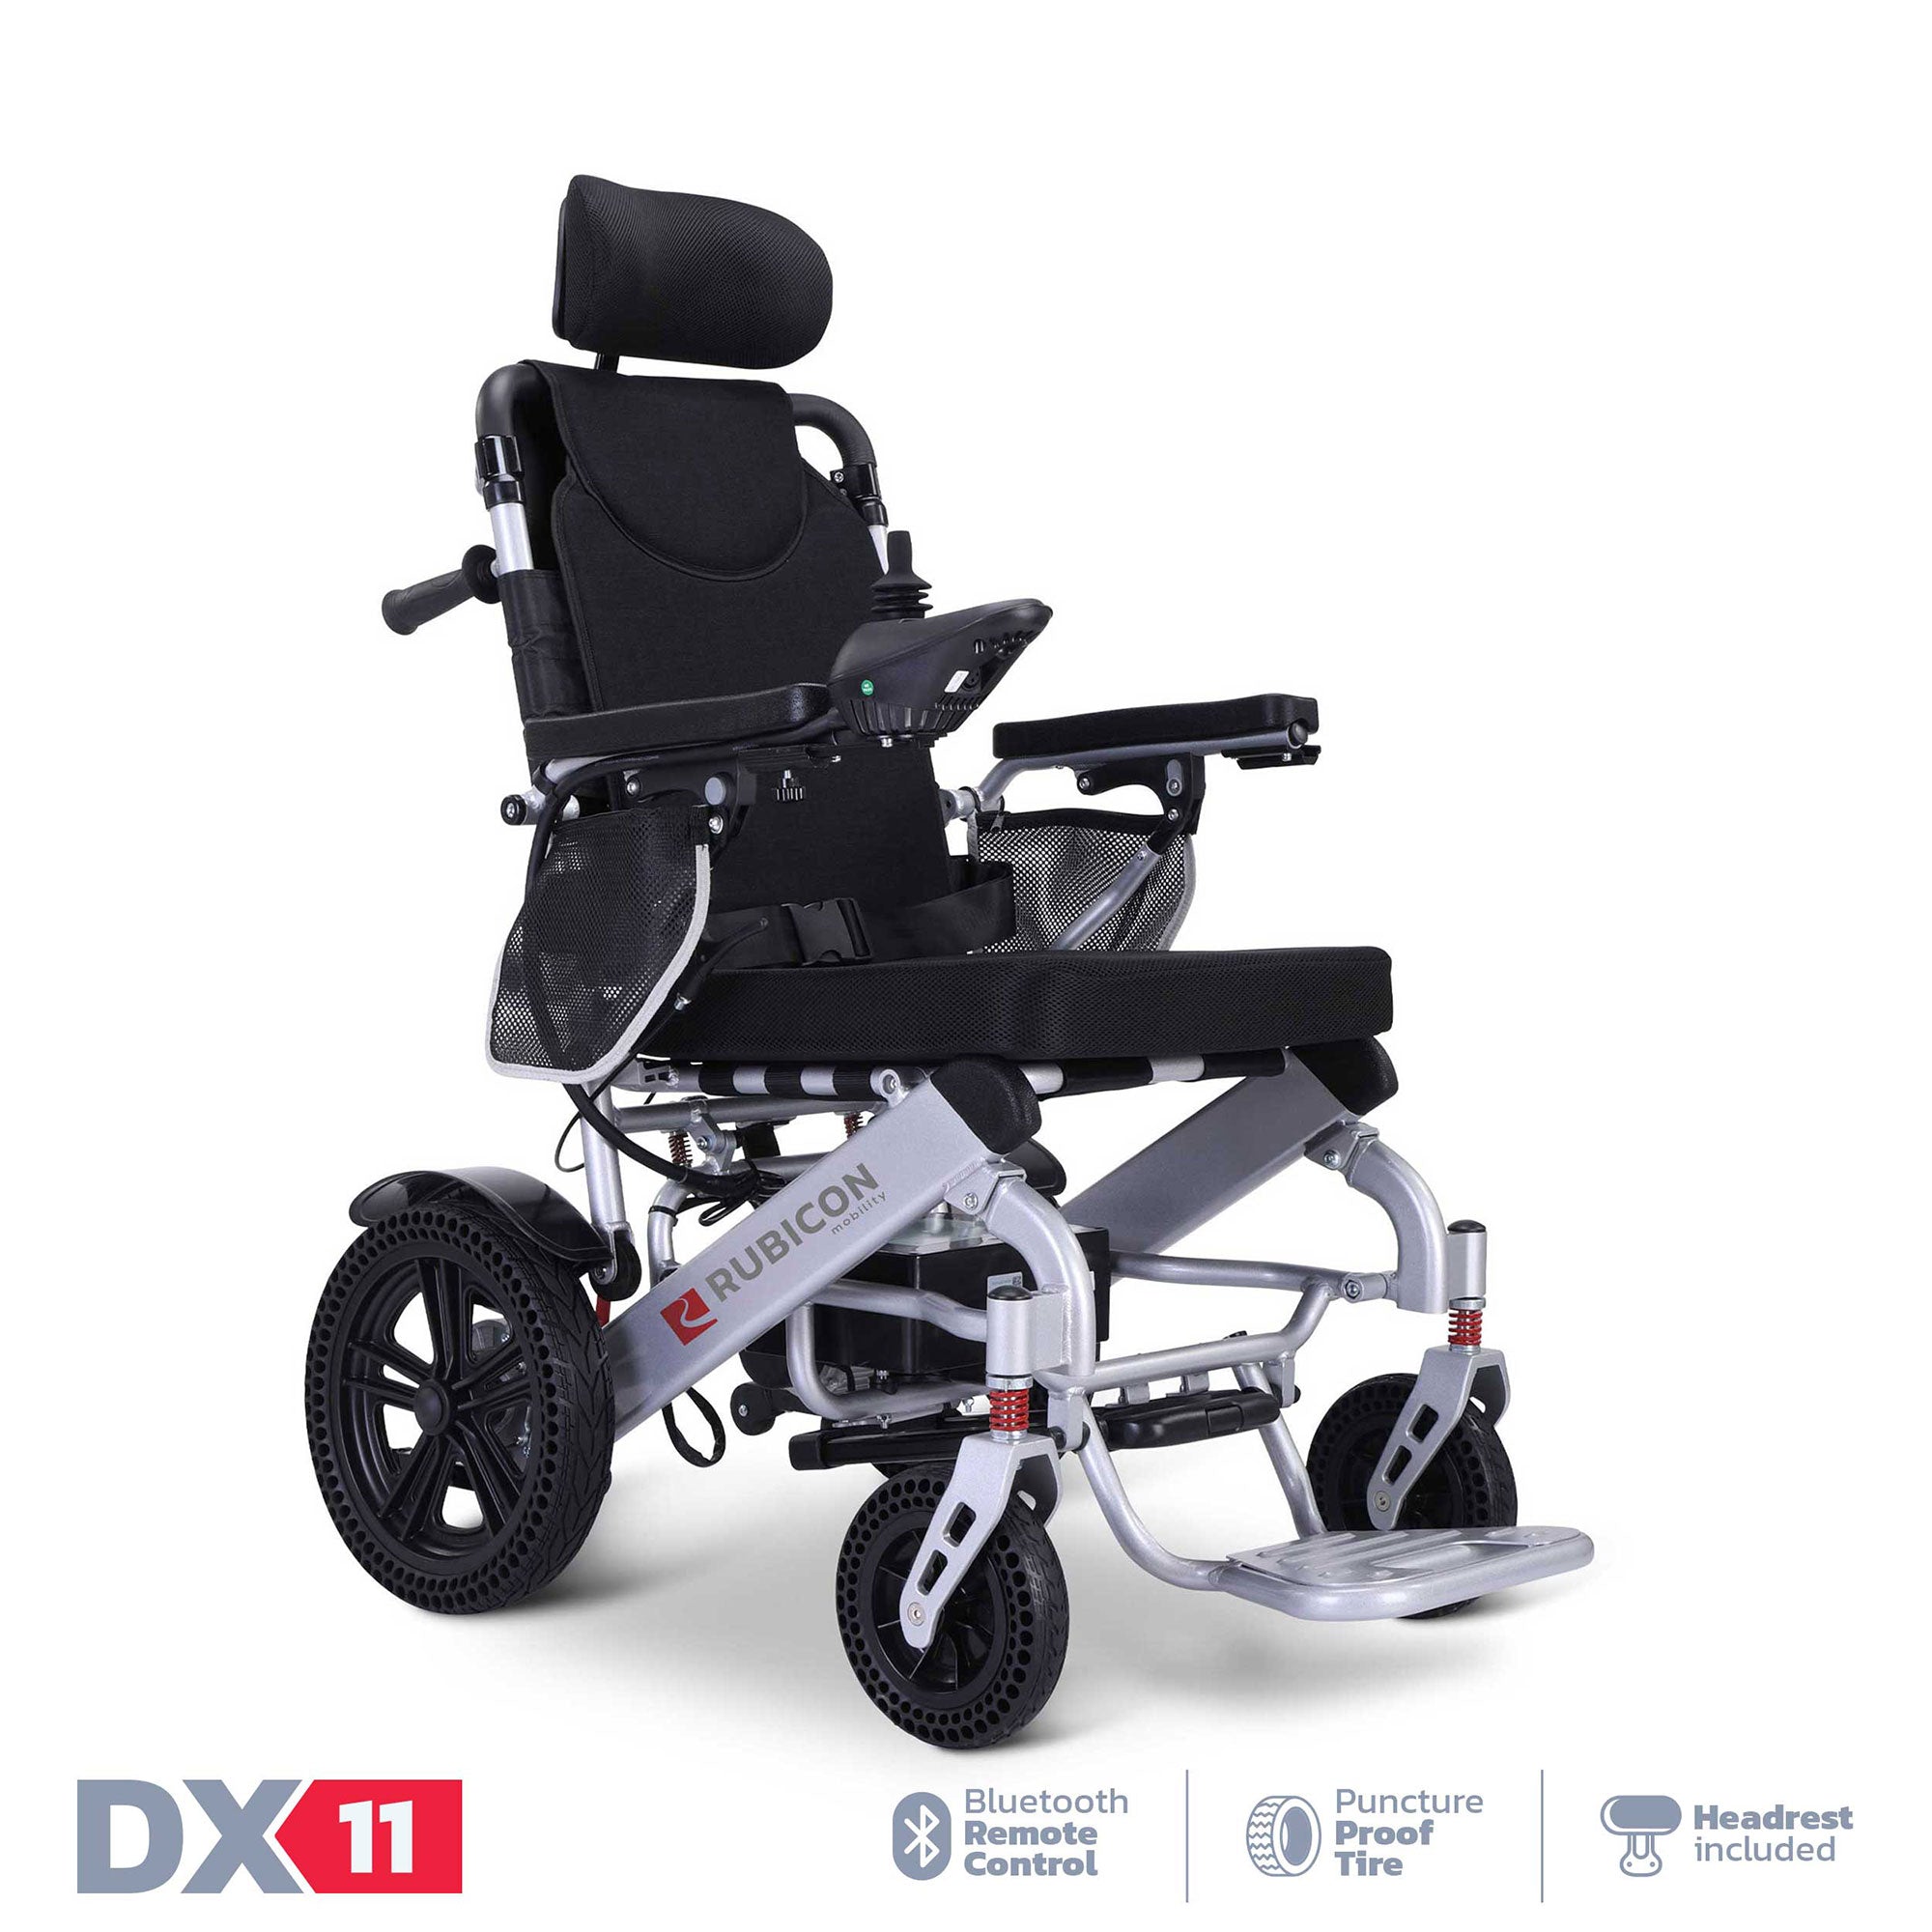 Rubicon DX11 - Reclining Electric Wheelchair